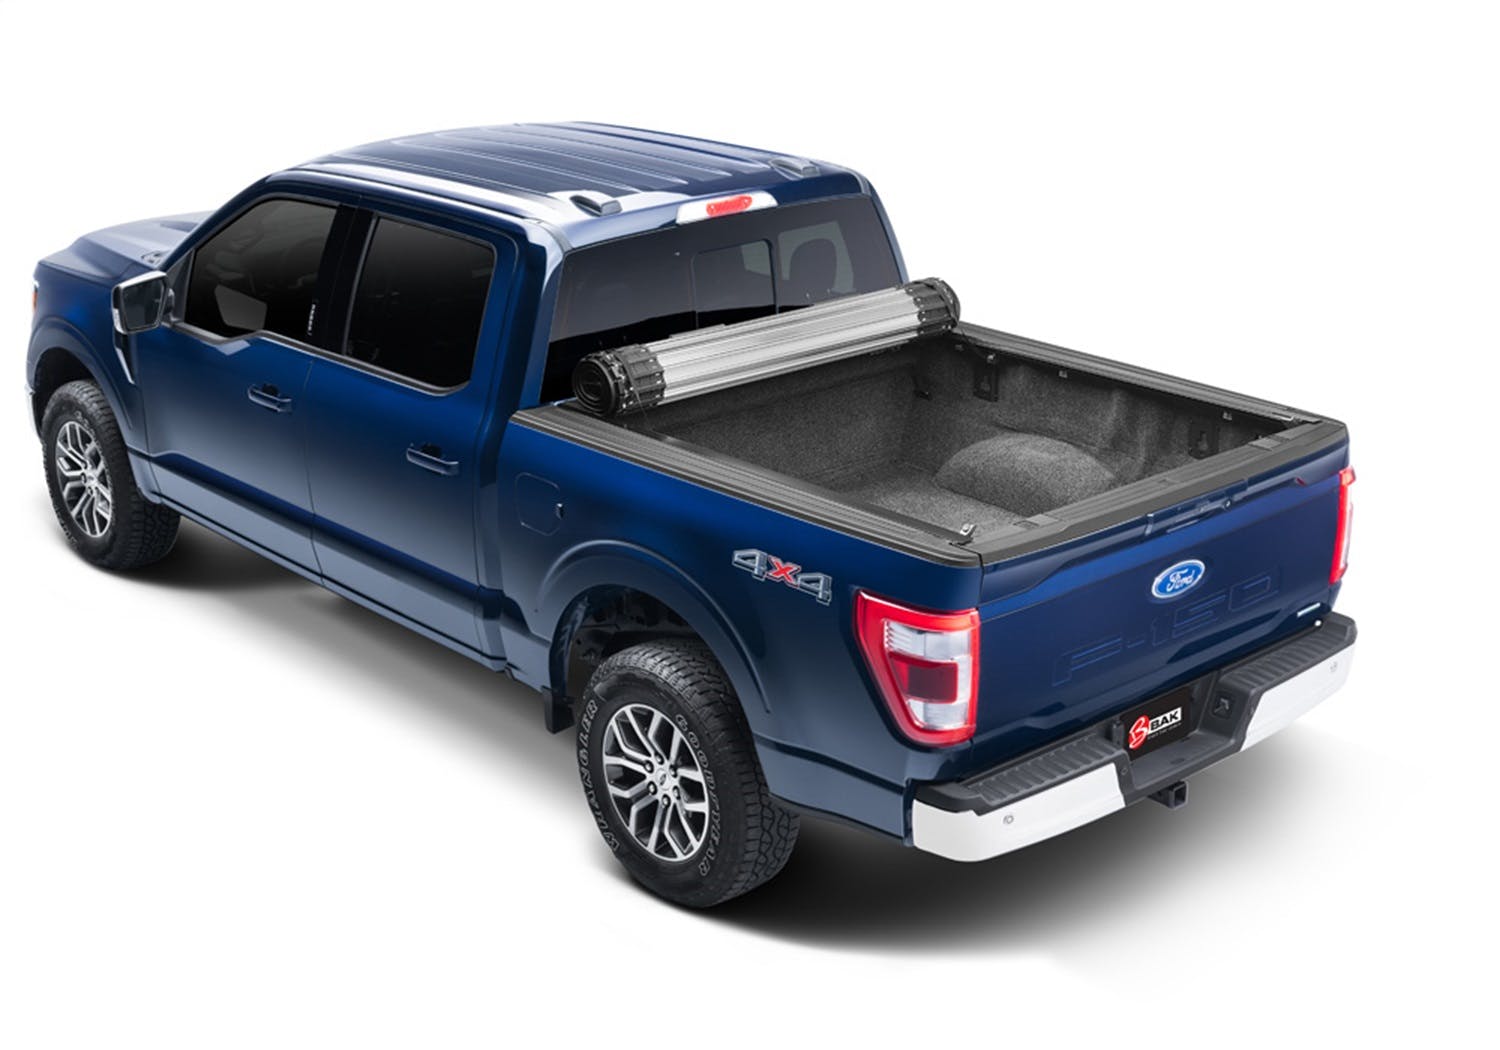 BAK Industries 39332 Revolver X2 Hard Rolling Truck Bed Cover